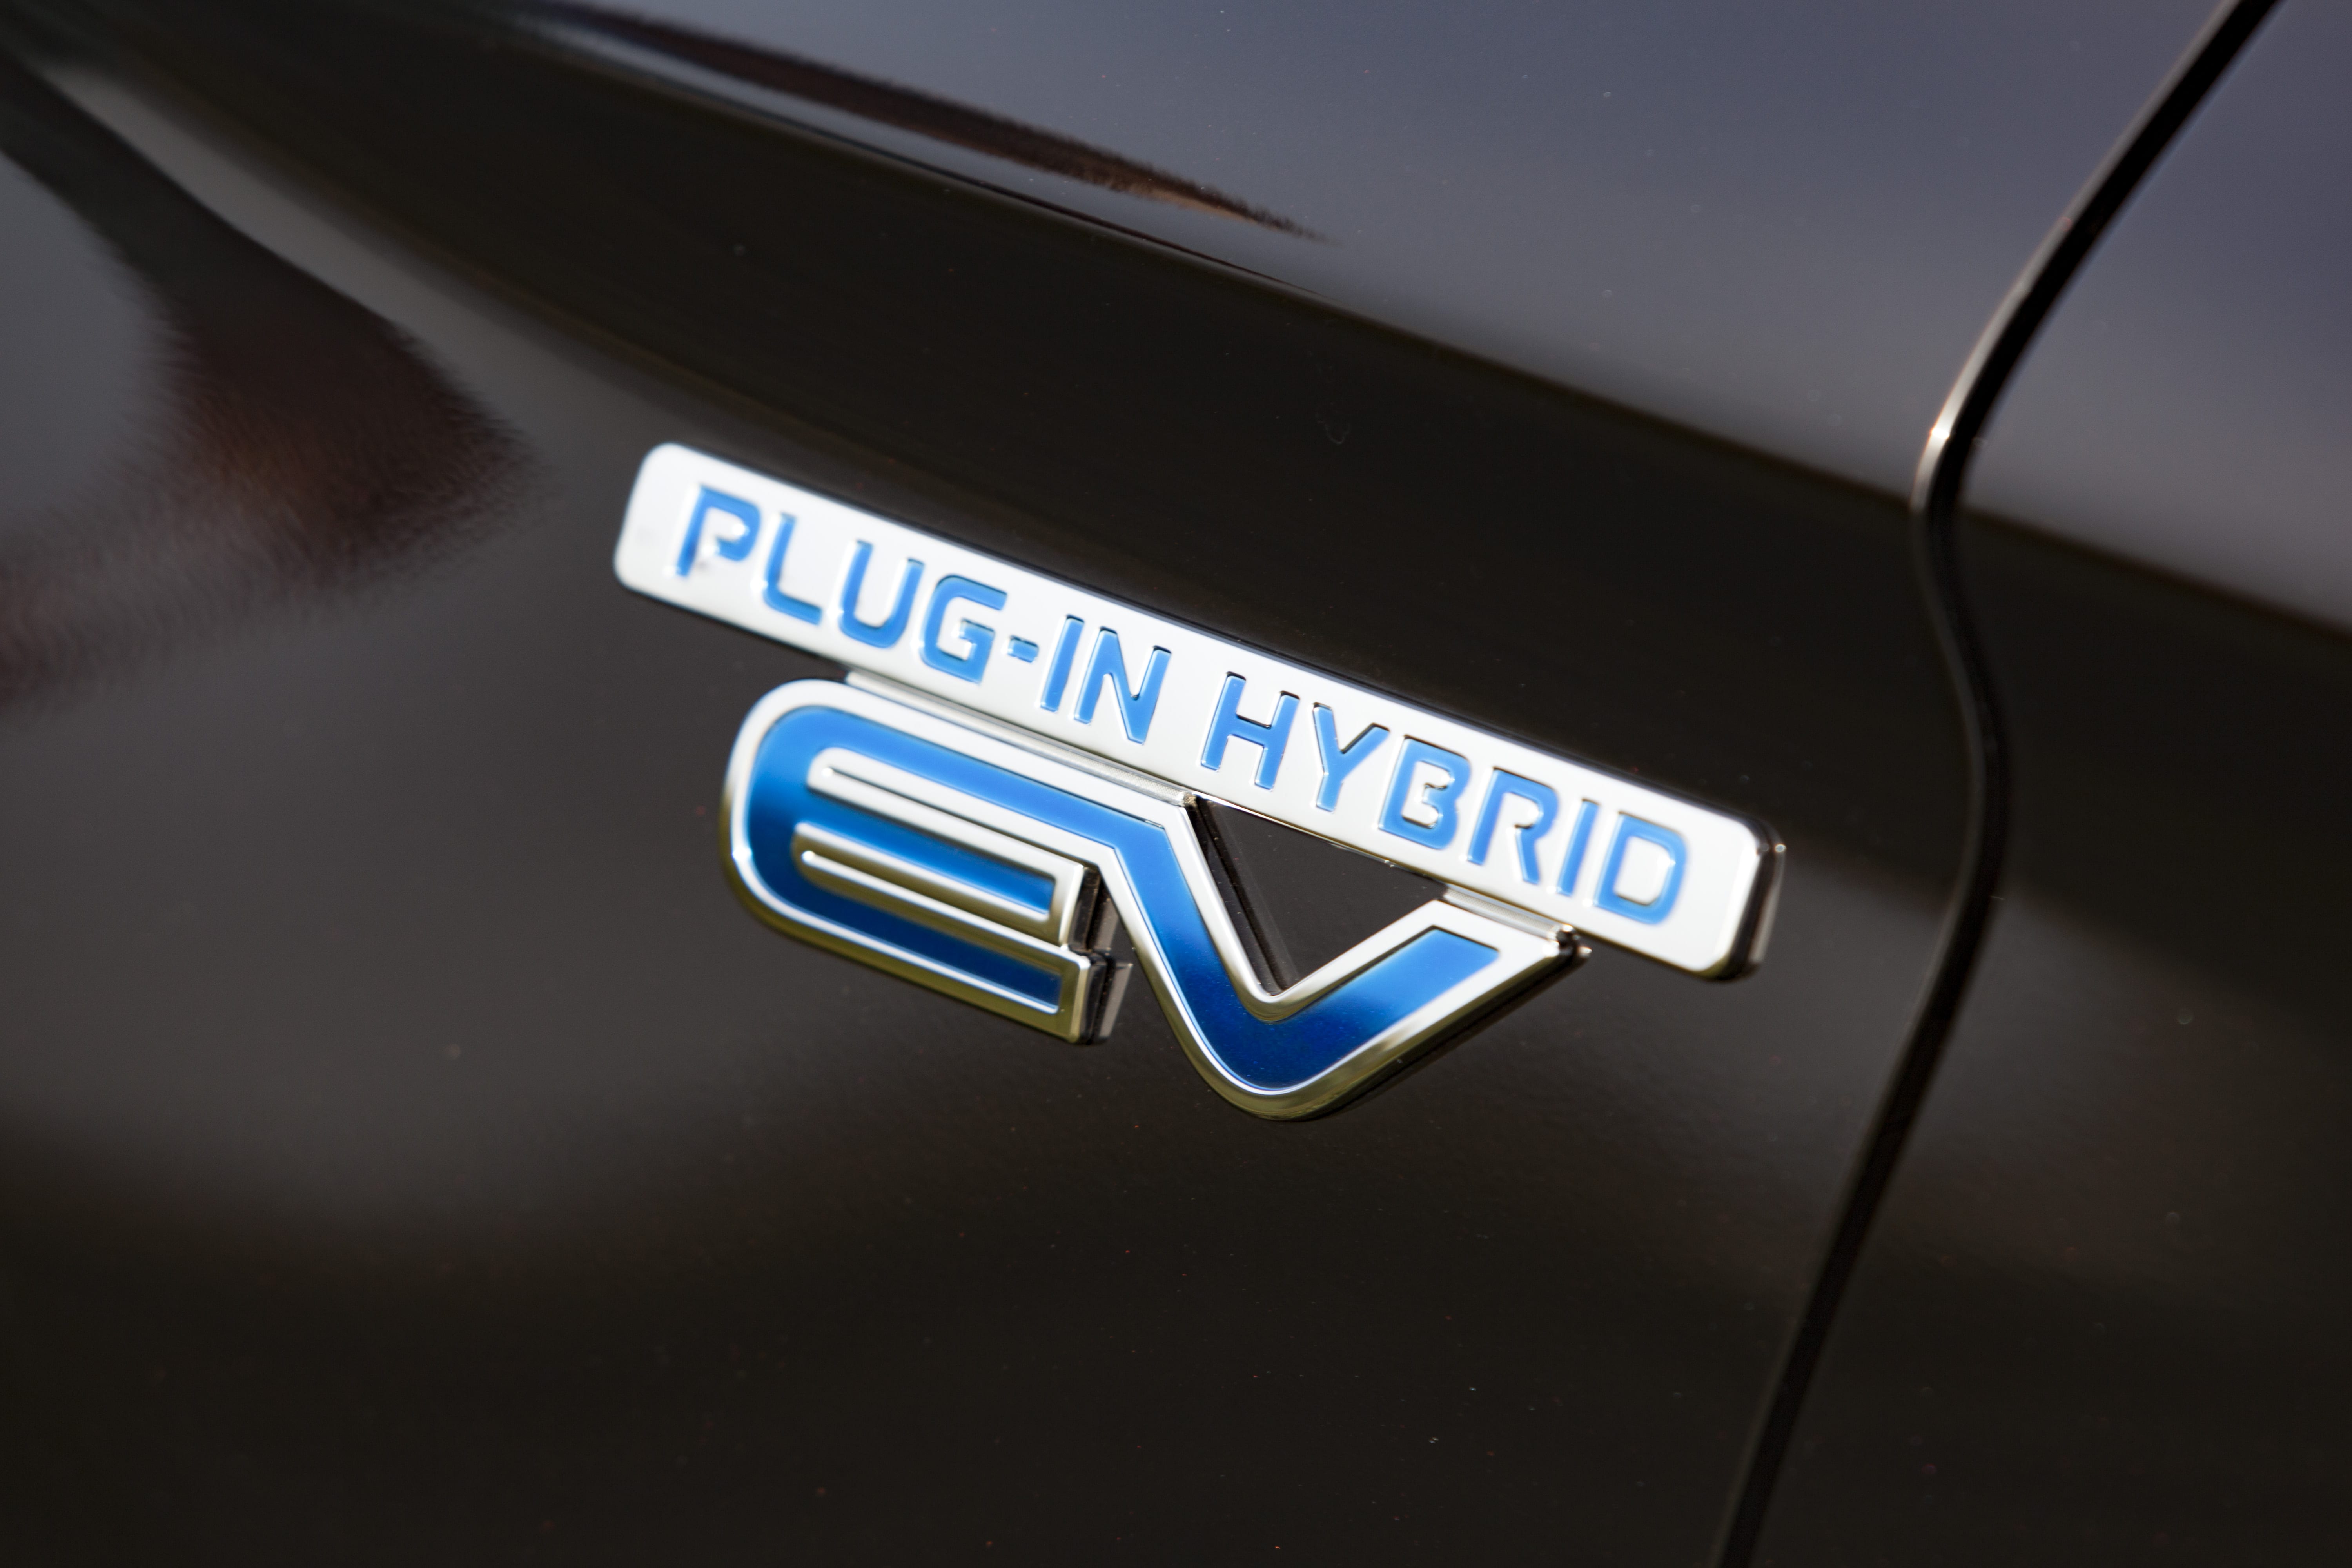 Hybrid and current PHEVs could be included in 2040 ban